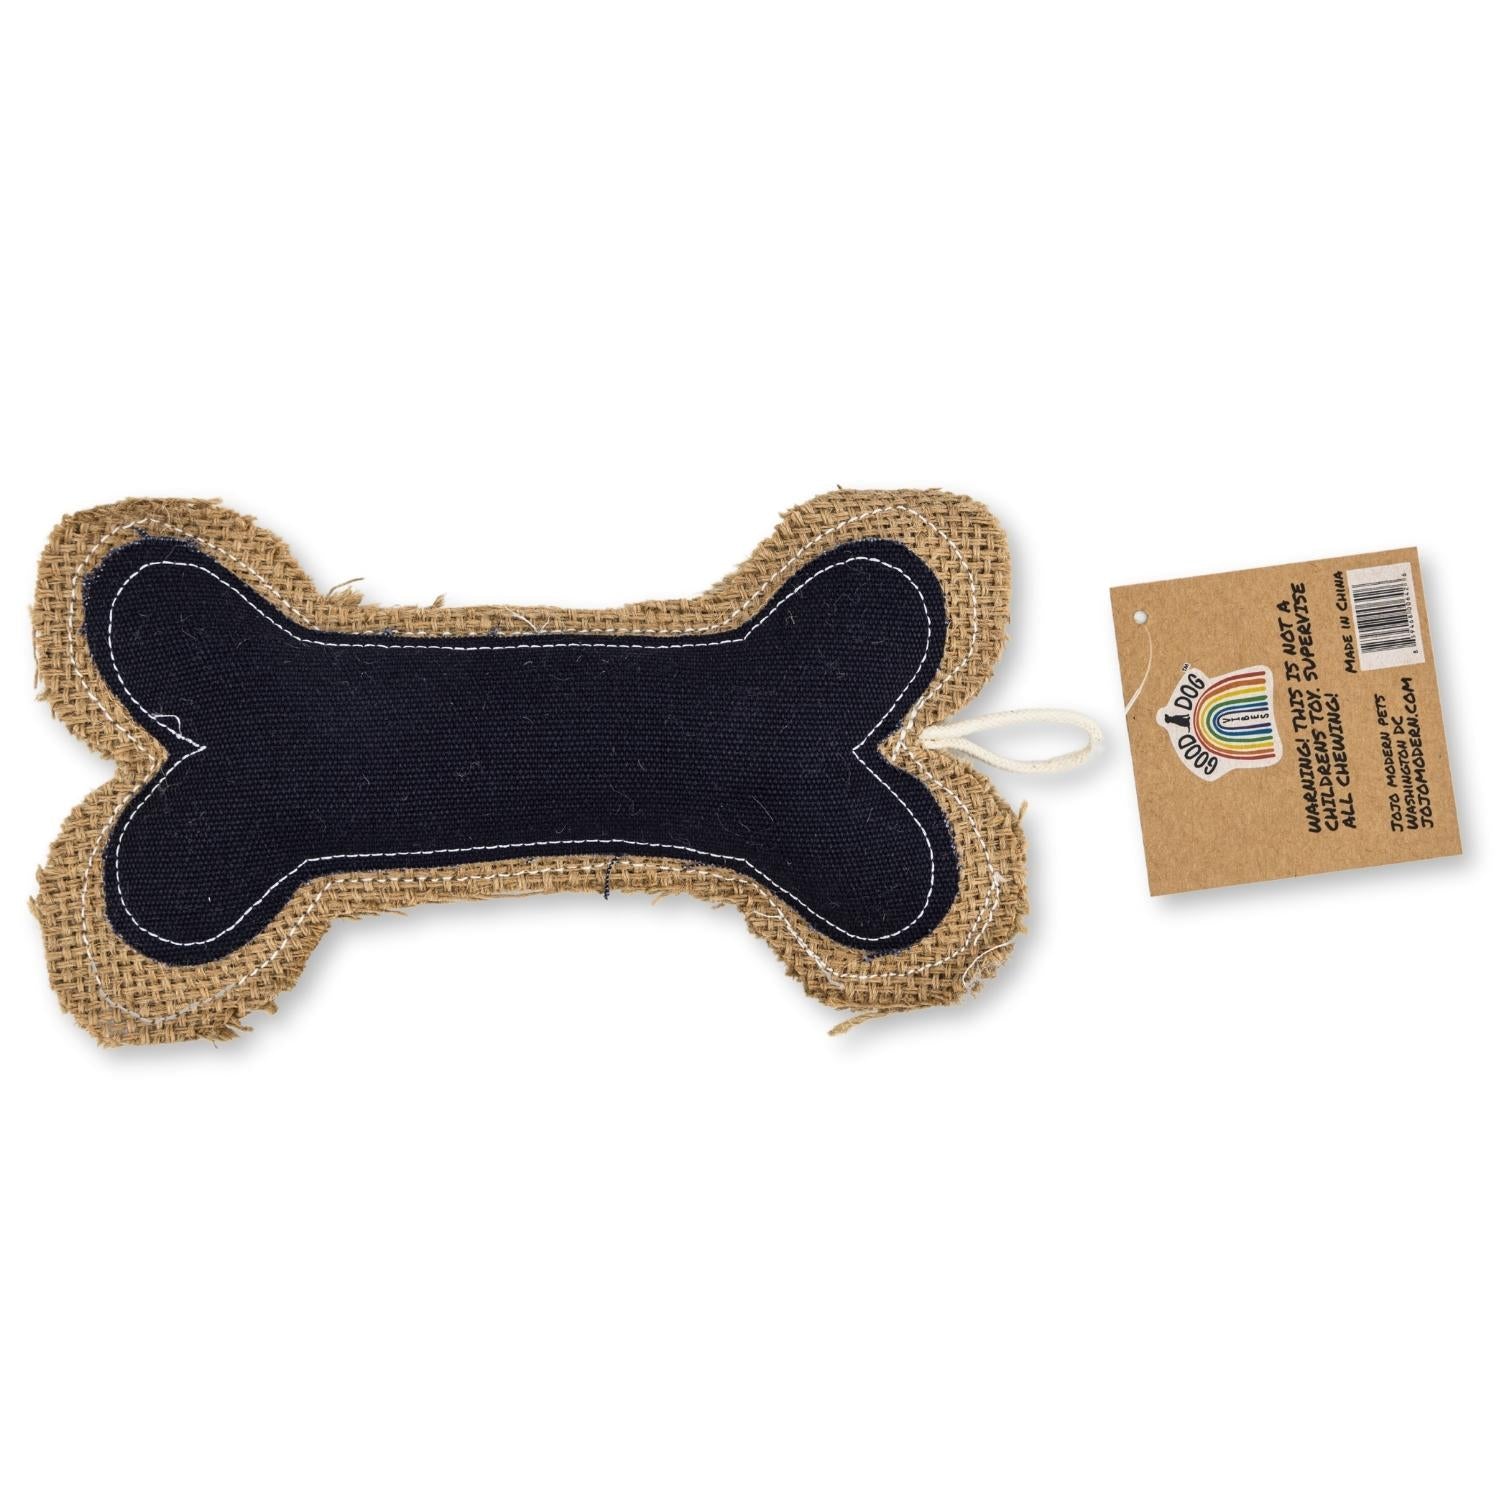 Sustainable Jean Leather-Jute Bone Pillow Dog Chew Toy-3